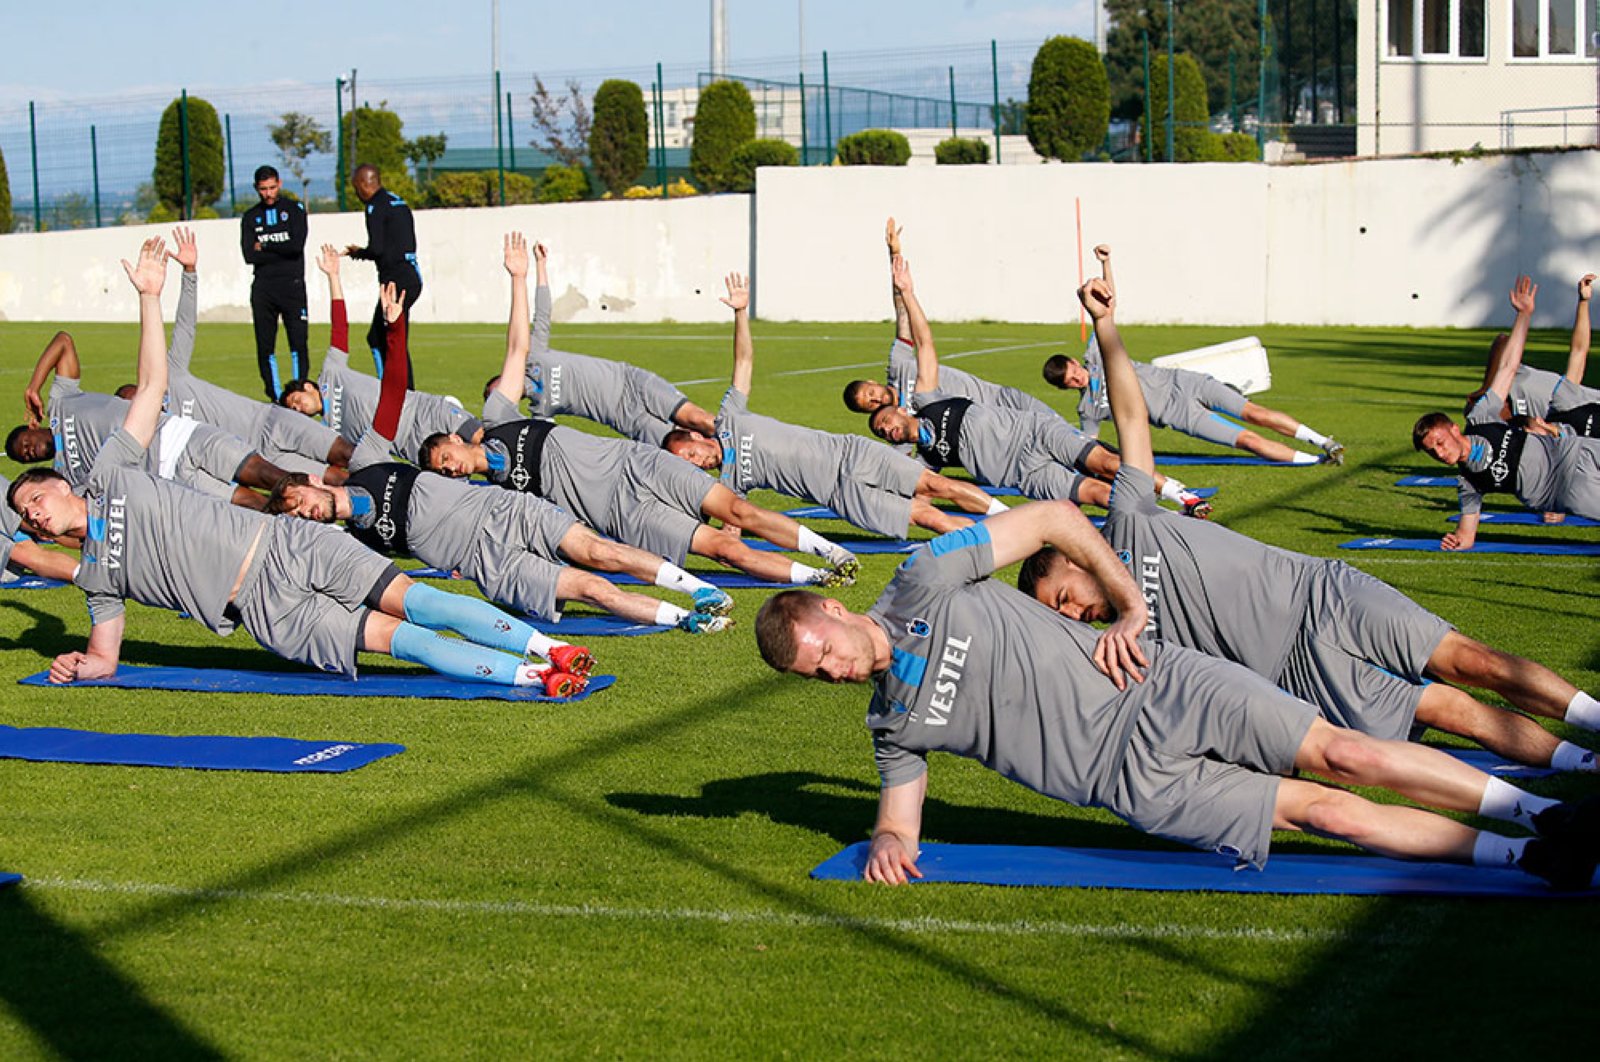 The current leader of the Super League Trabzonspor makes training as the league is expected to resume next month, May 12, 2020. (AA)